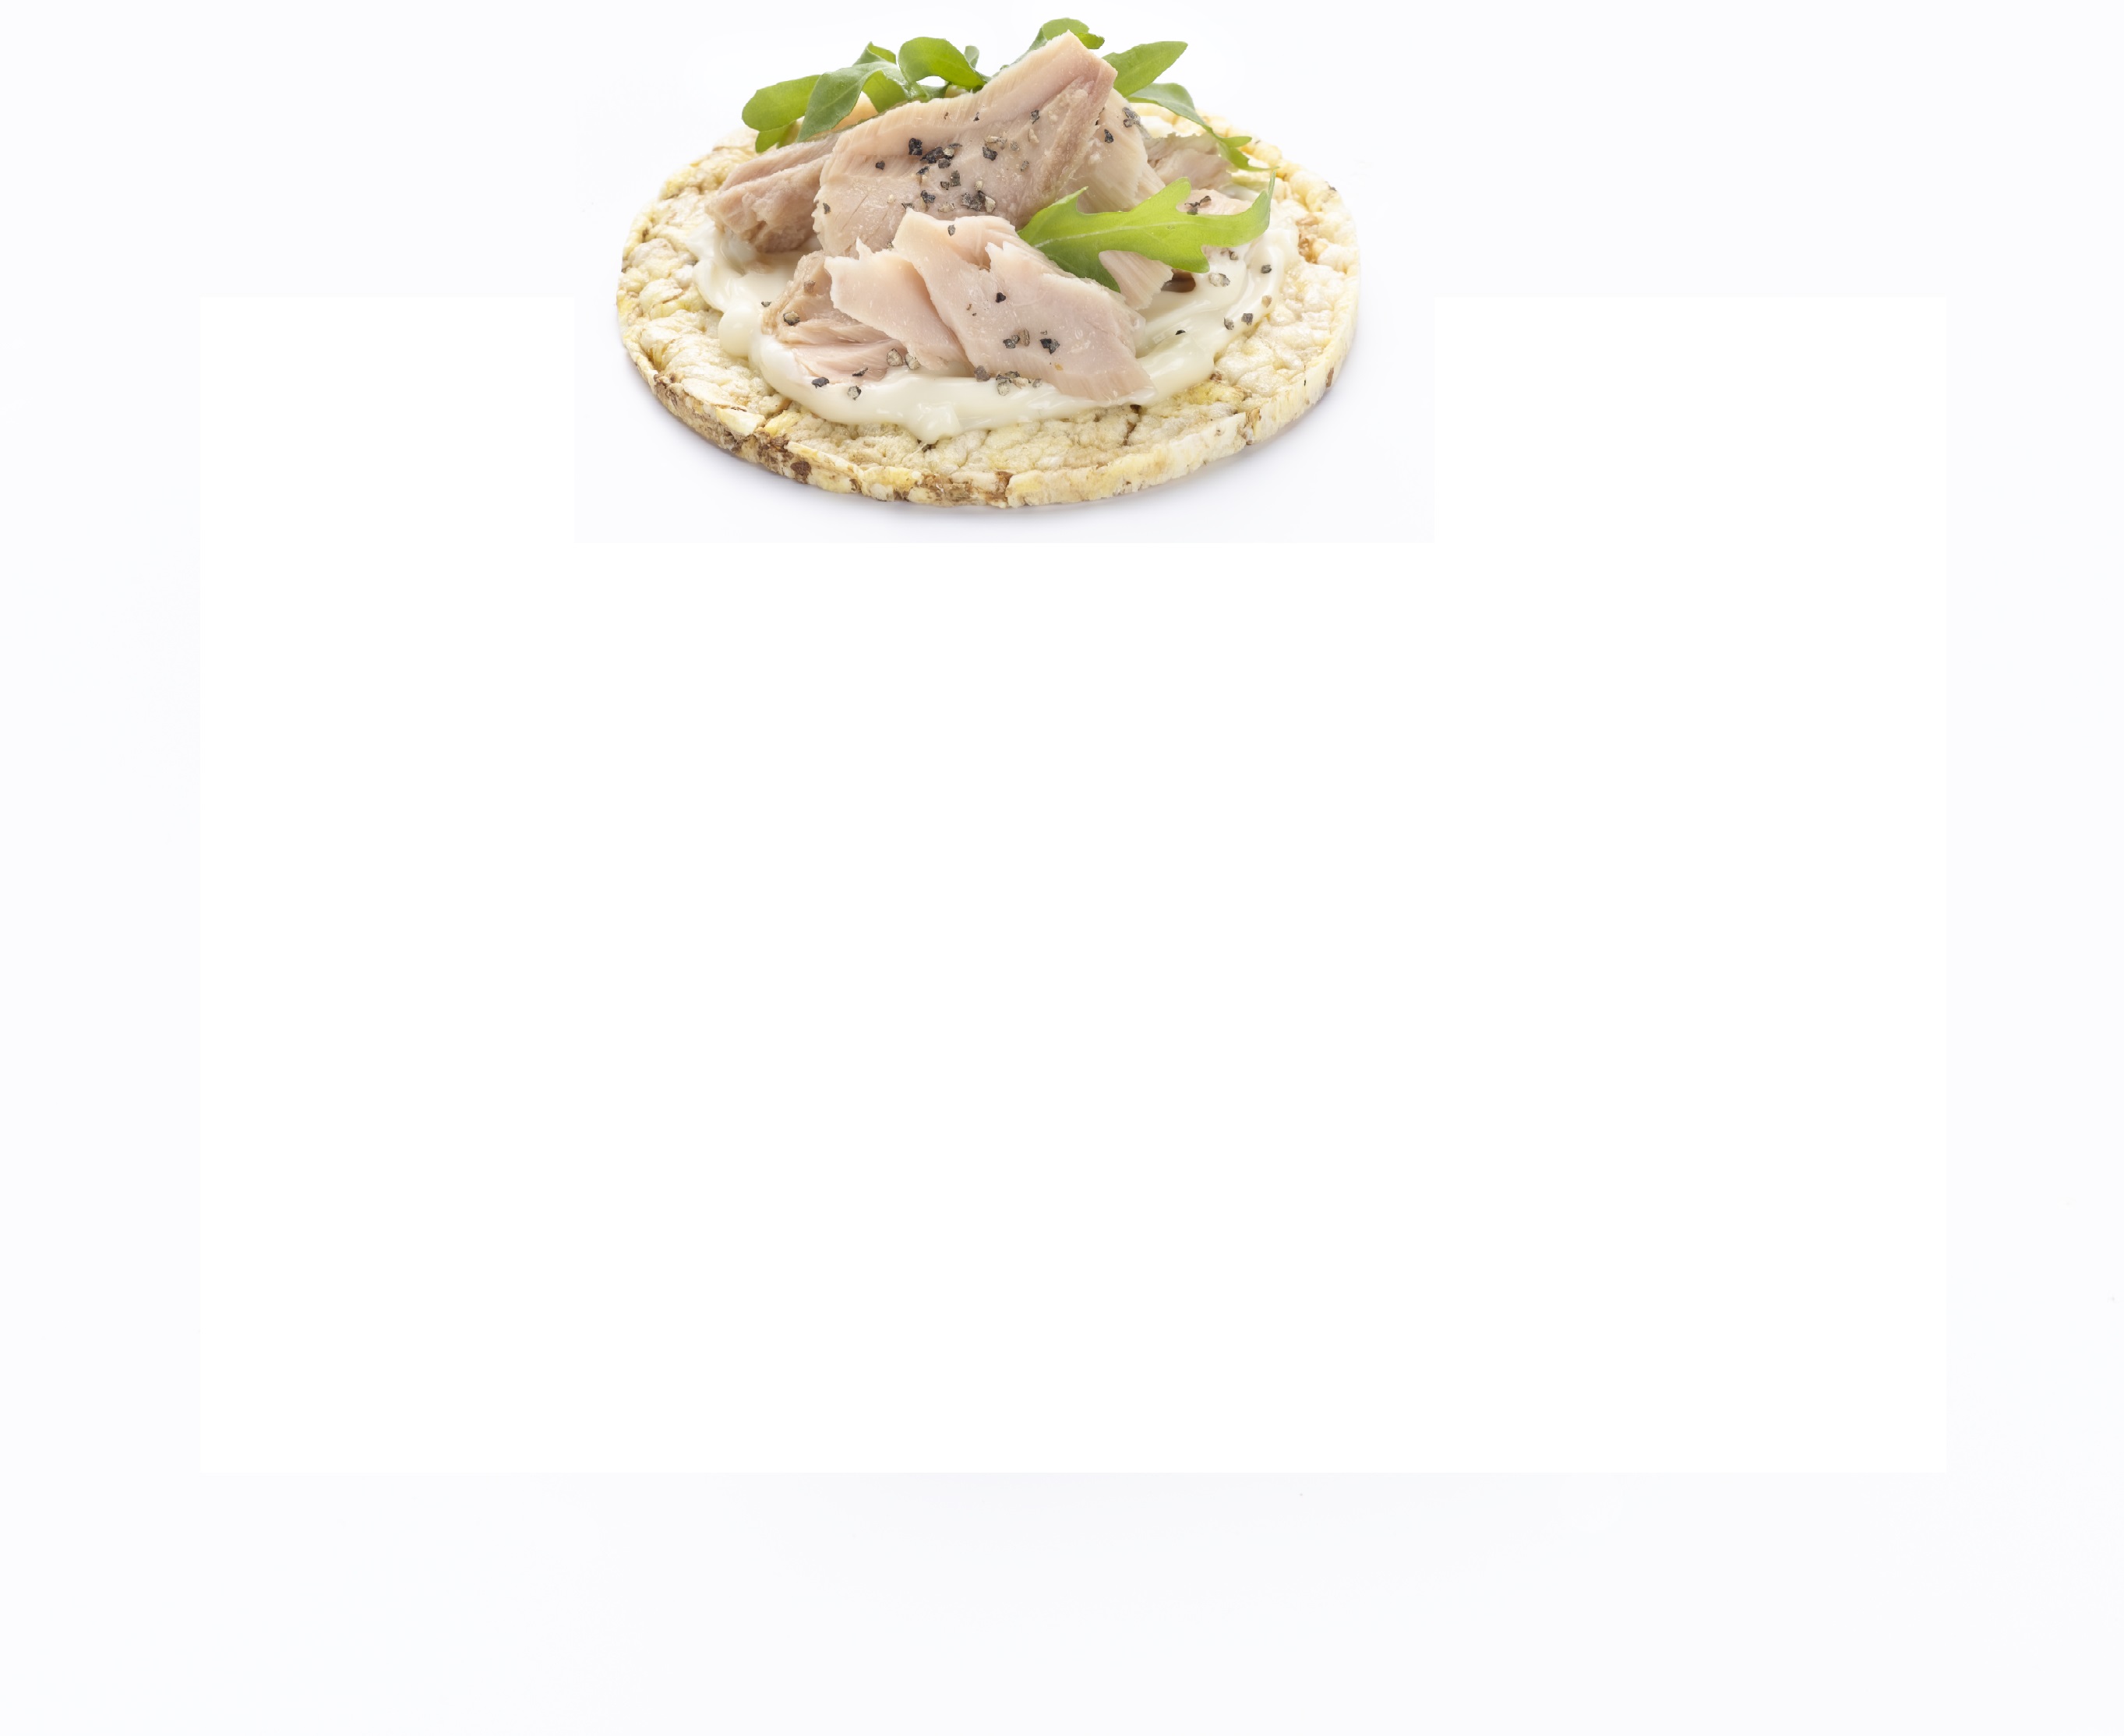 Quick office lunch of tuna & mayonnaise on Corn Thins slices